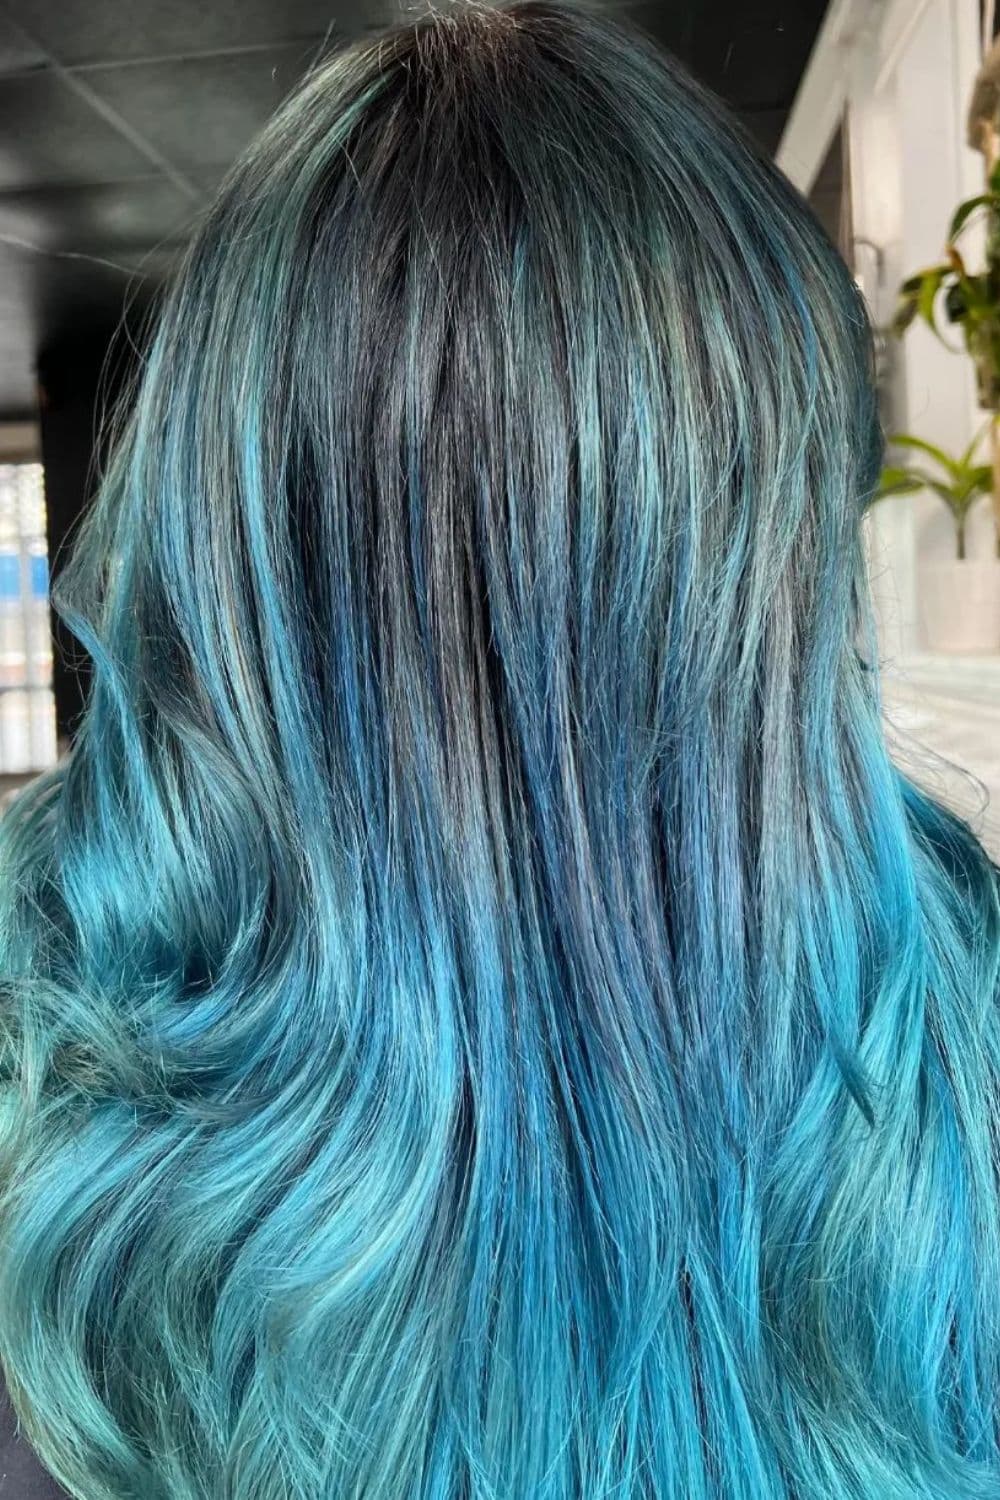 A woman with blue black to turquoise ombre hair.